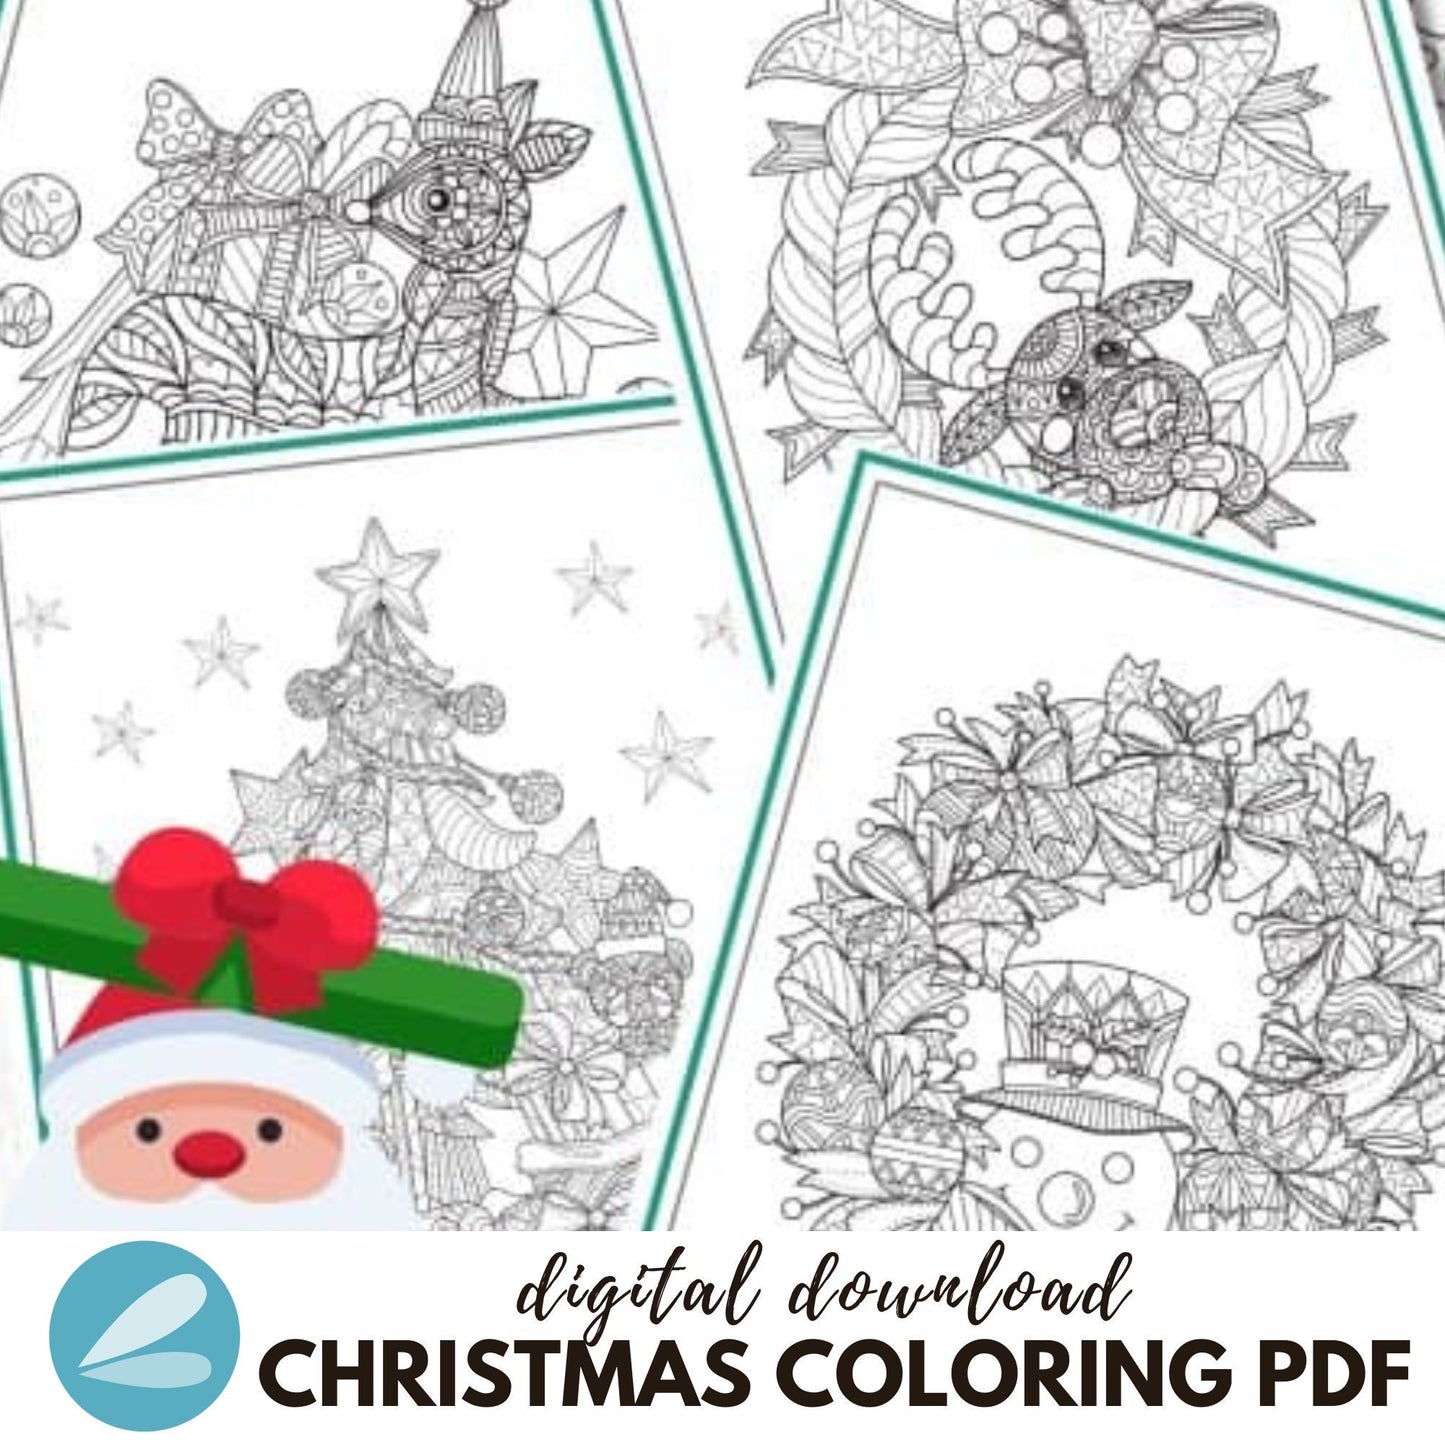 Christmas Printable Coloring Pages - Christmas Coloring Sheets PDF - Instant Download